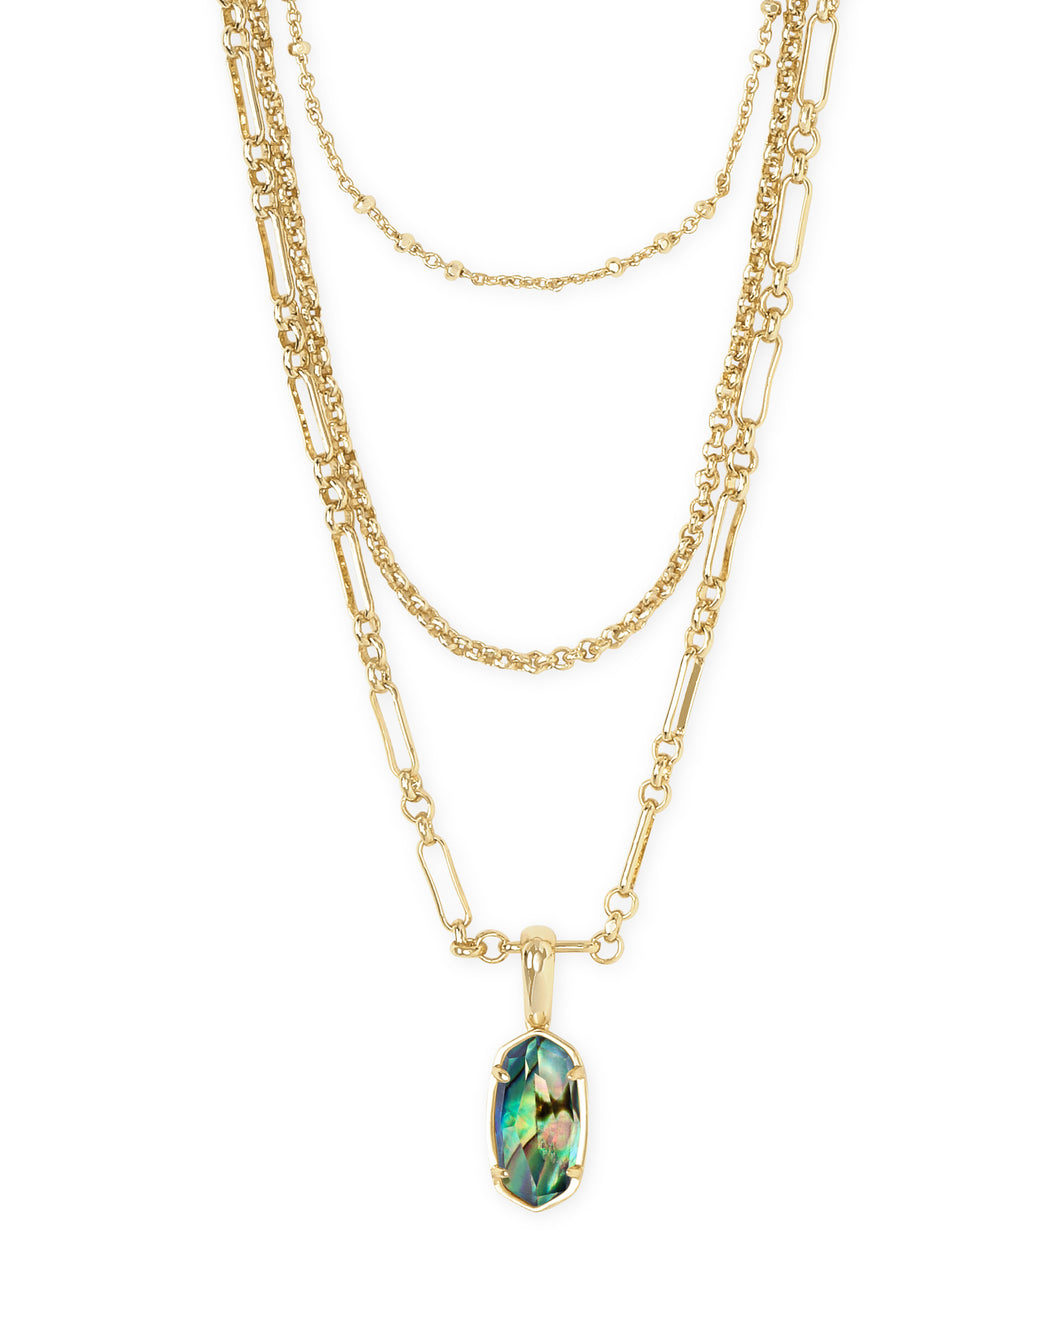 Elisa Gold Triple Strand Necklace in Abalone Shell